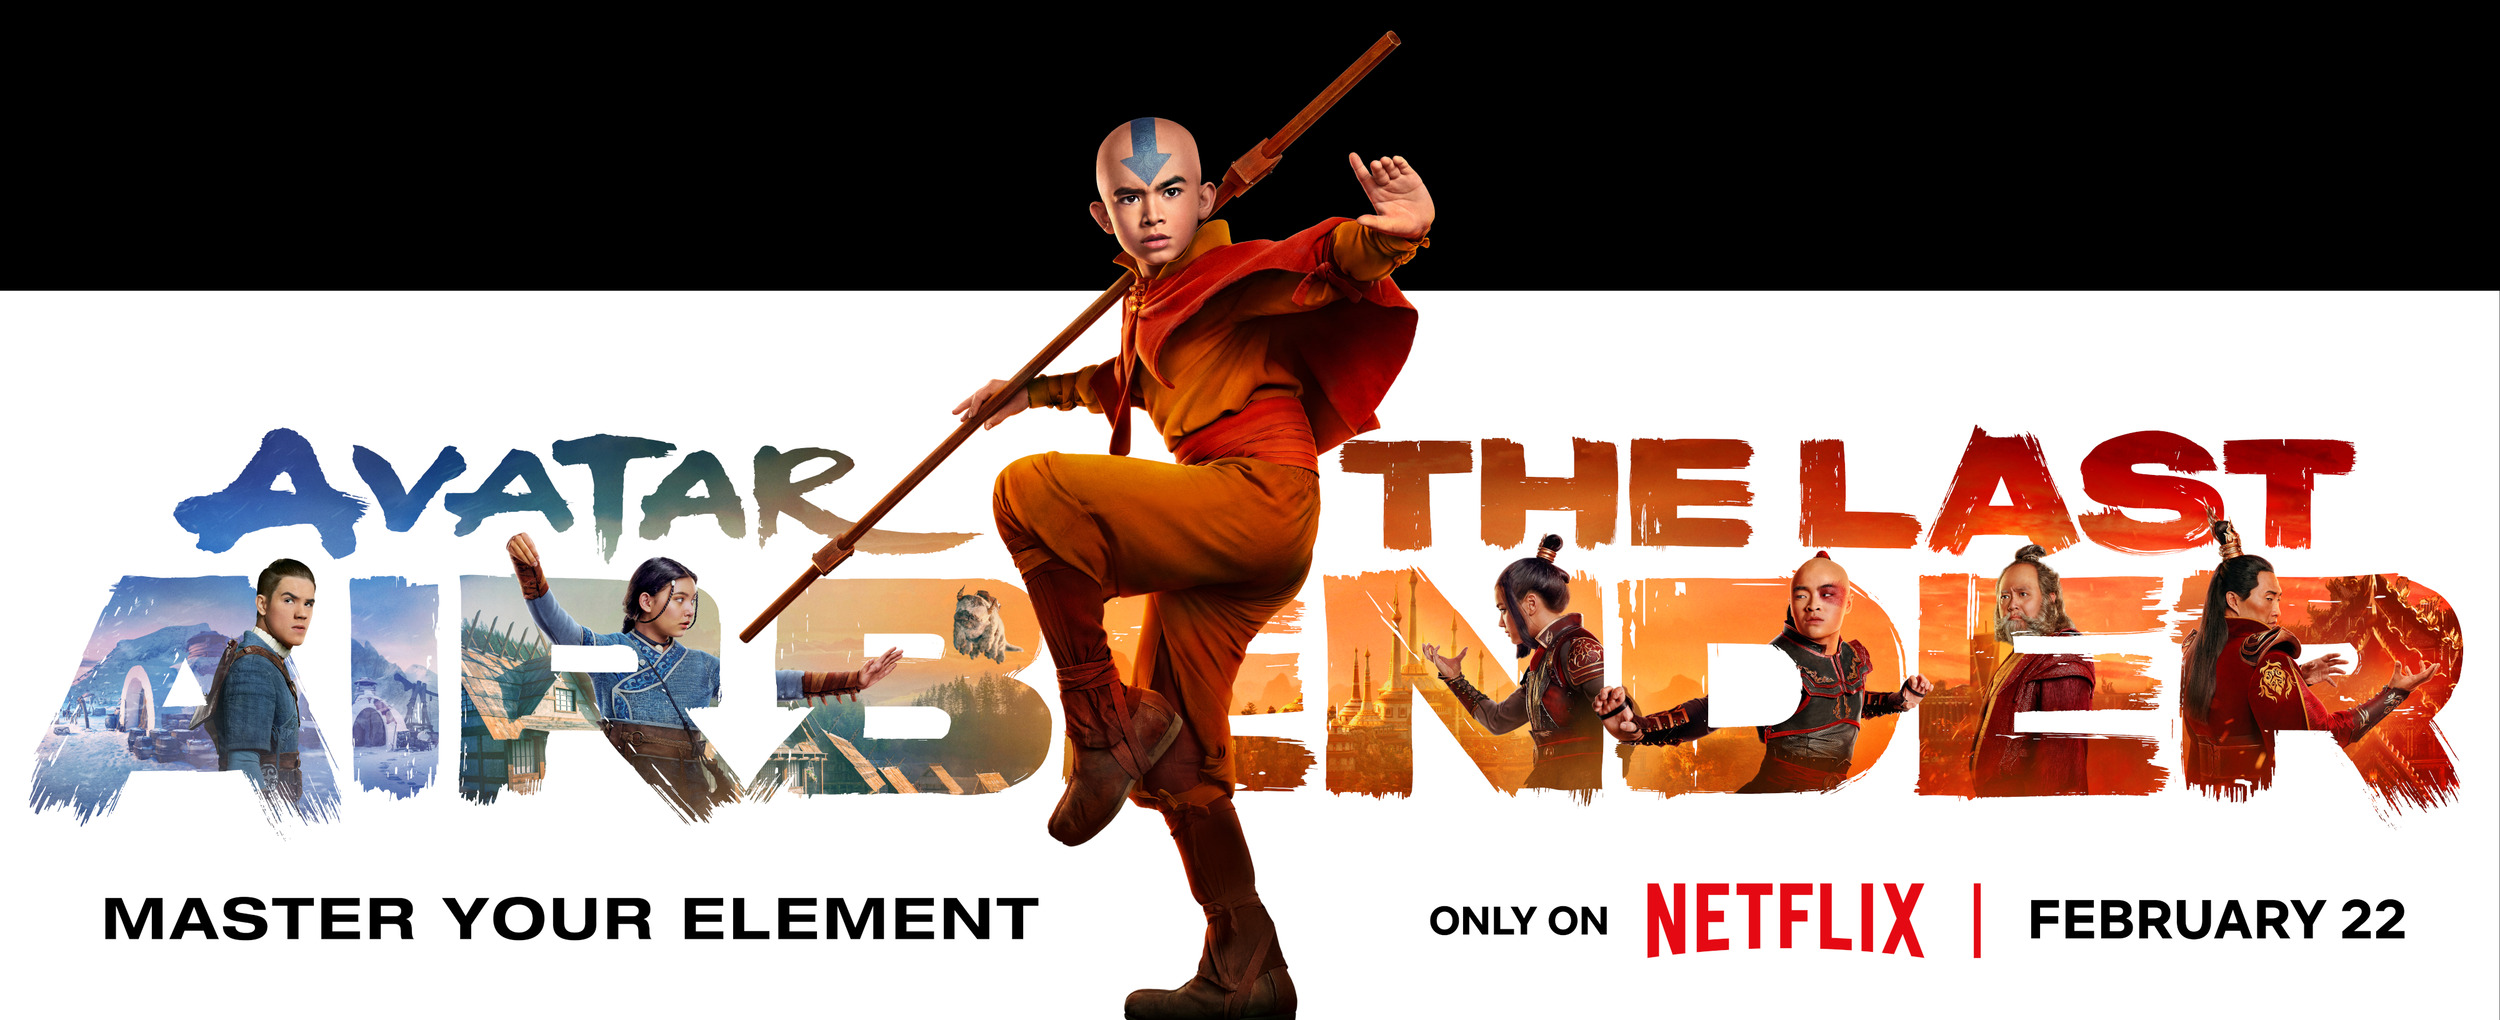 Mega Sized TV Poster Image for Avatar: The Last Airbender (#23 of 24)